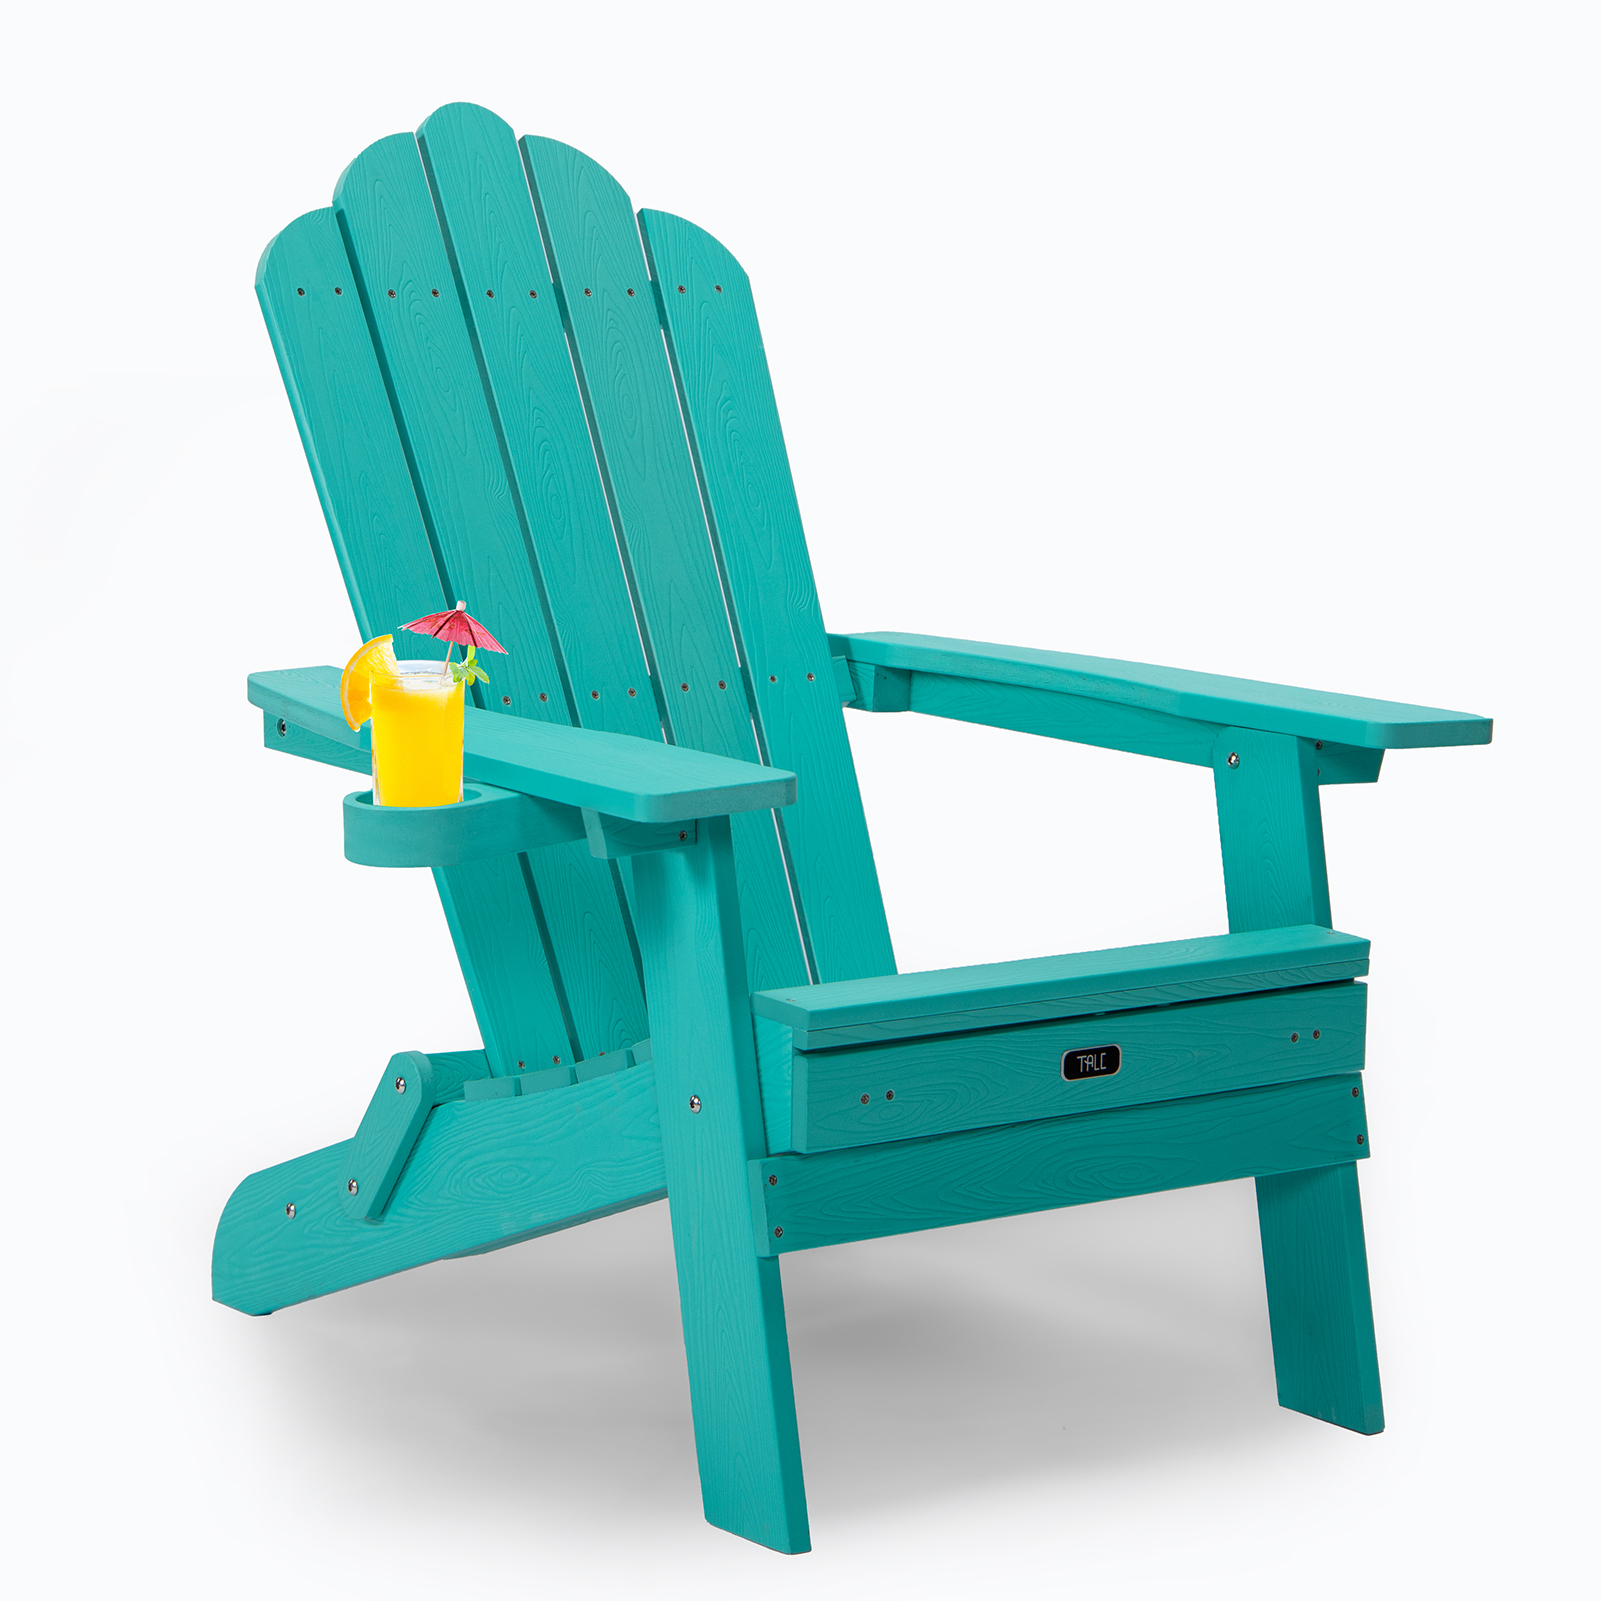 GZXS Folding Adirondack Chair with Pullout Ottoman and Cup Holder, Oaversized Wood Lounge Chair for Patio Deck Garden, Backyard Furniture, Green - image 2 of 10